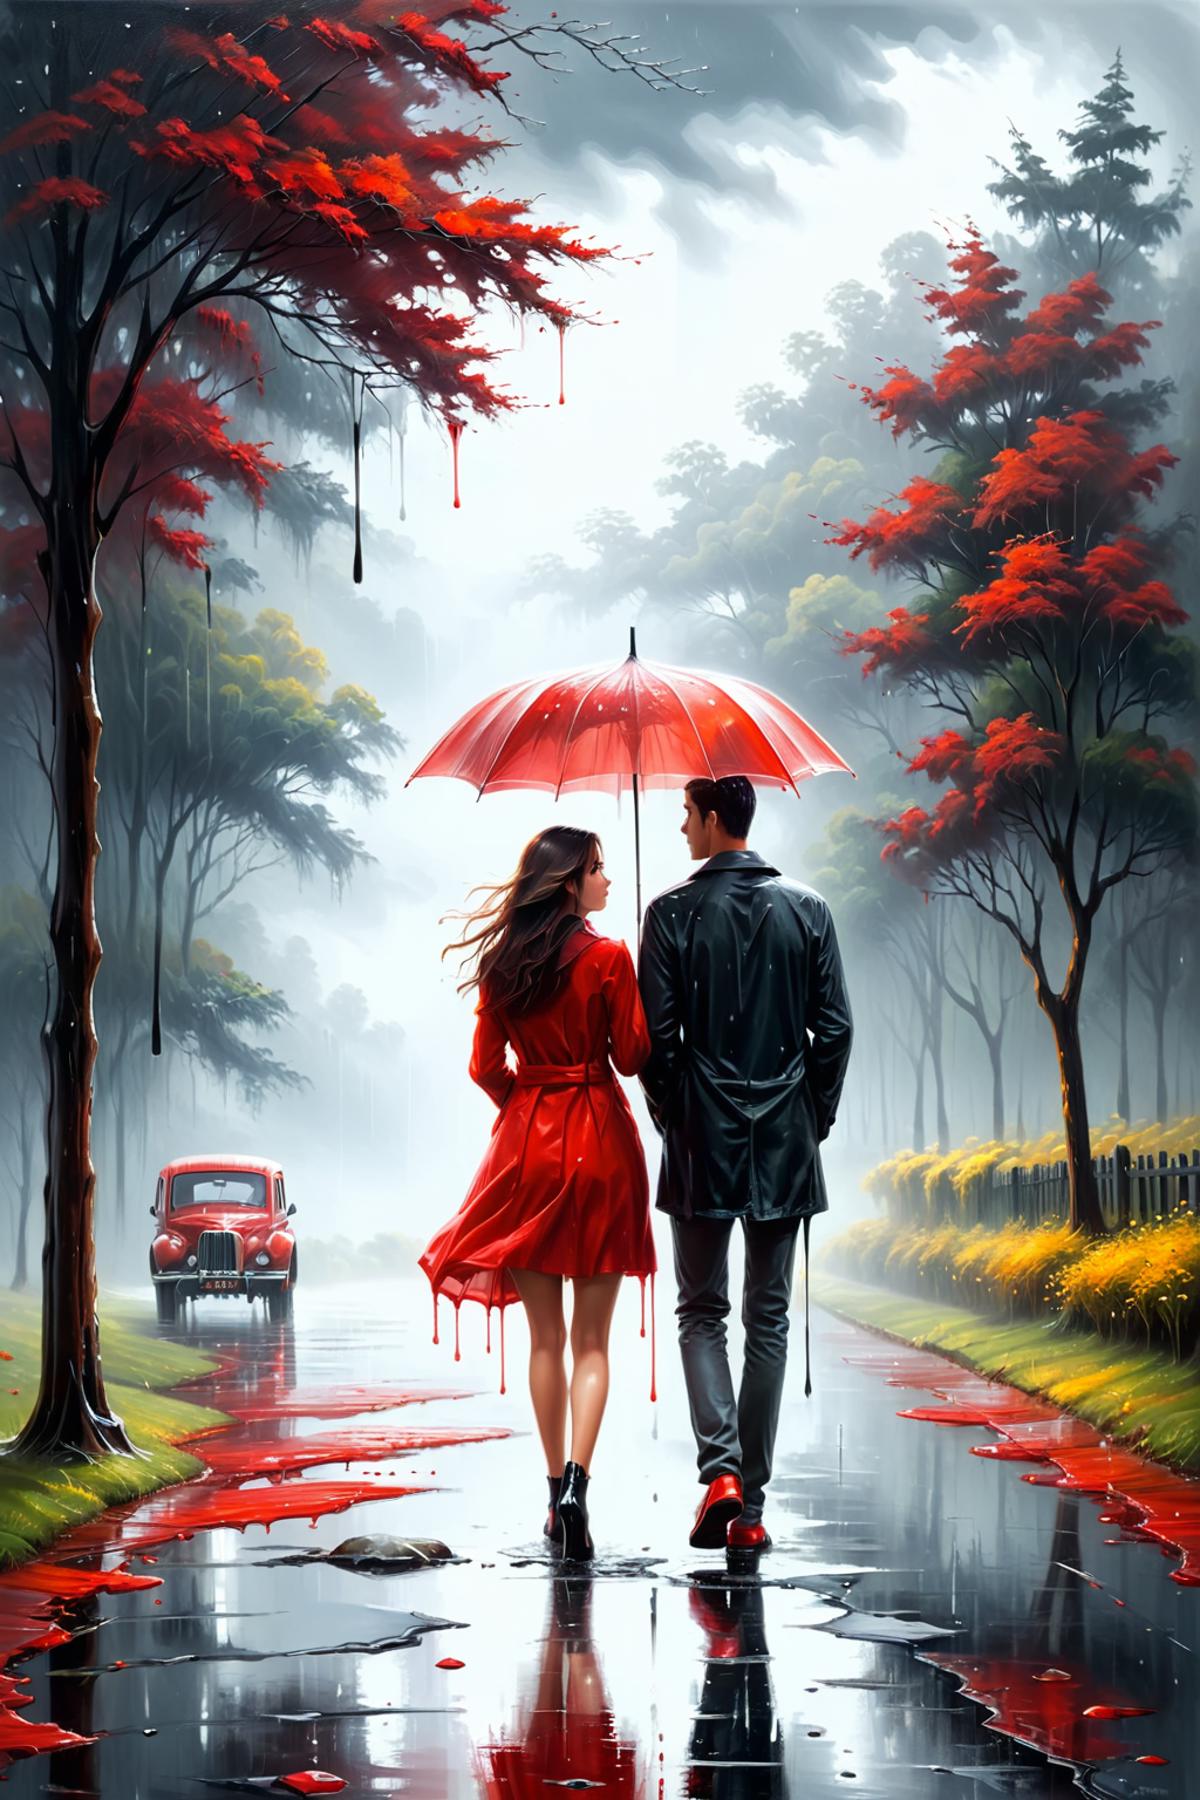 A Painting of a Man and Woman Walking Down a Rainy Path Holding an Umbrella